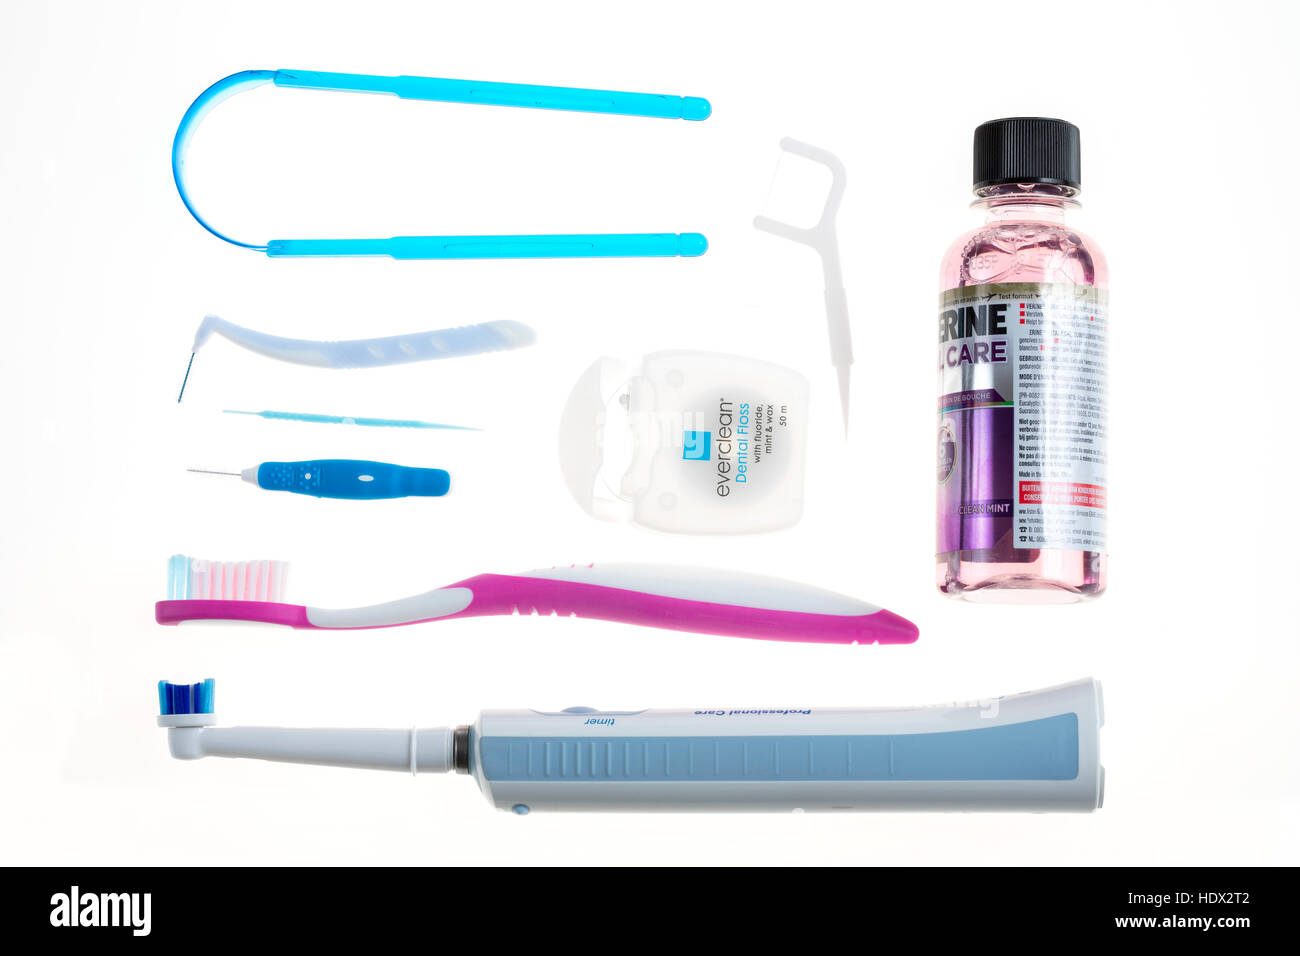 Dental hygiene products, toothbrush, toothpick, electrical toothbrush, interdentalbrush, dental floss, oral water, tongue cleaner, Stock Photo